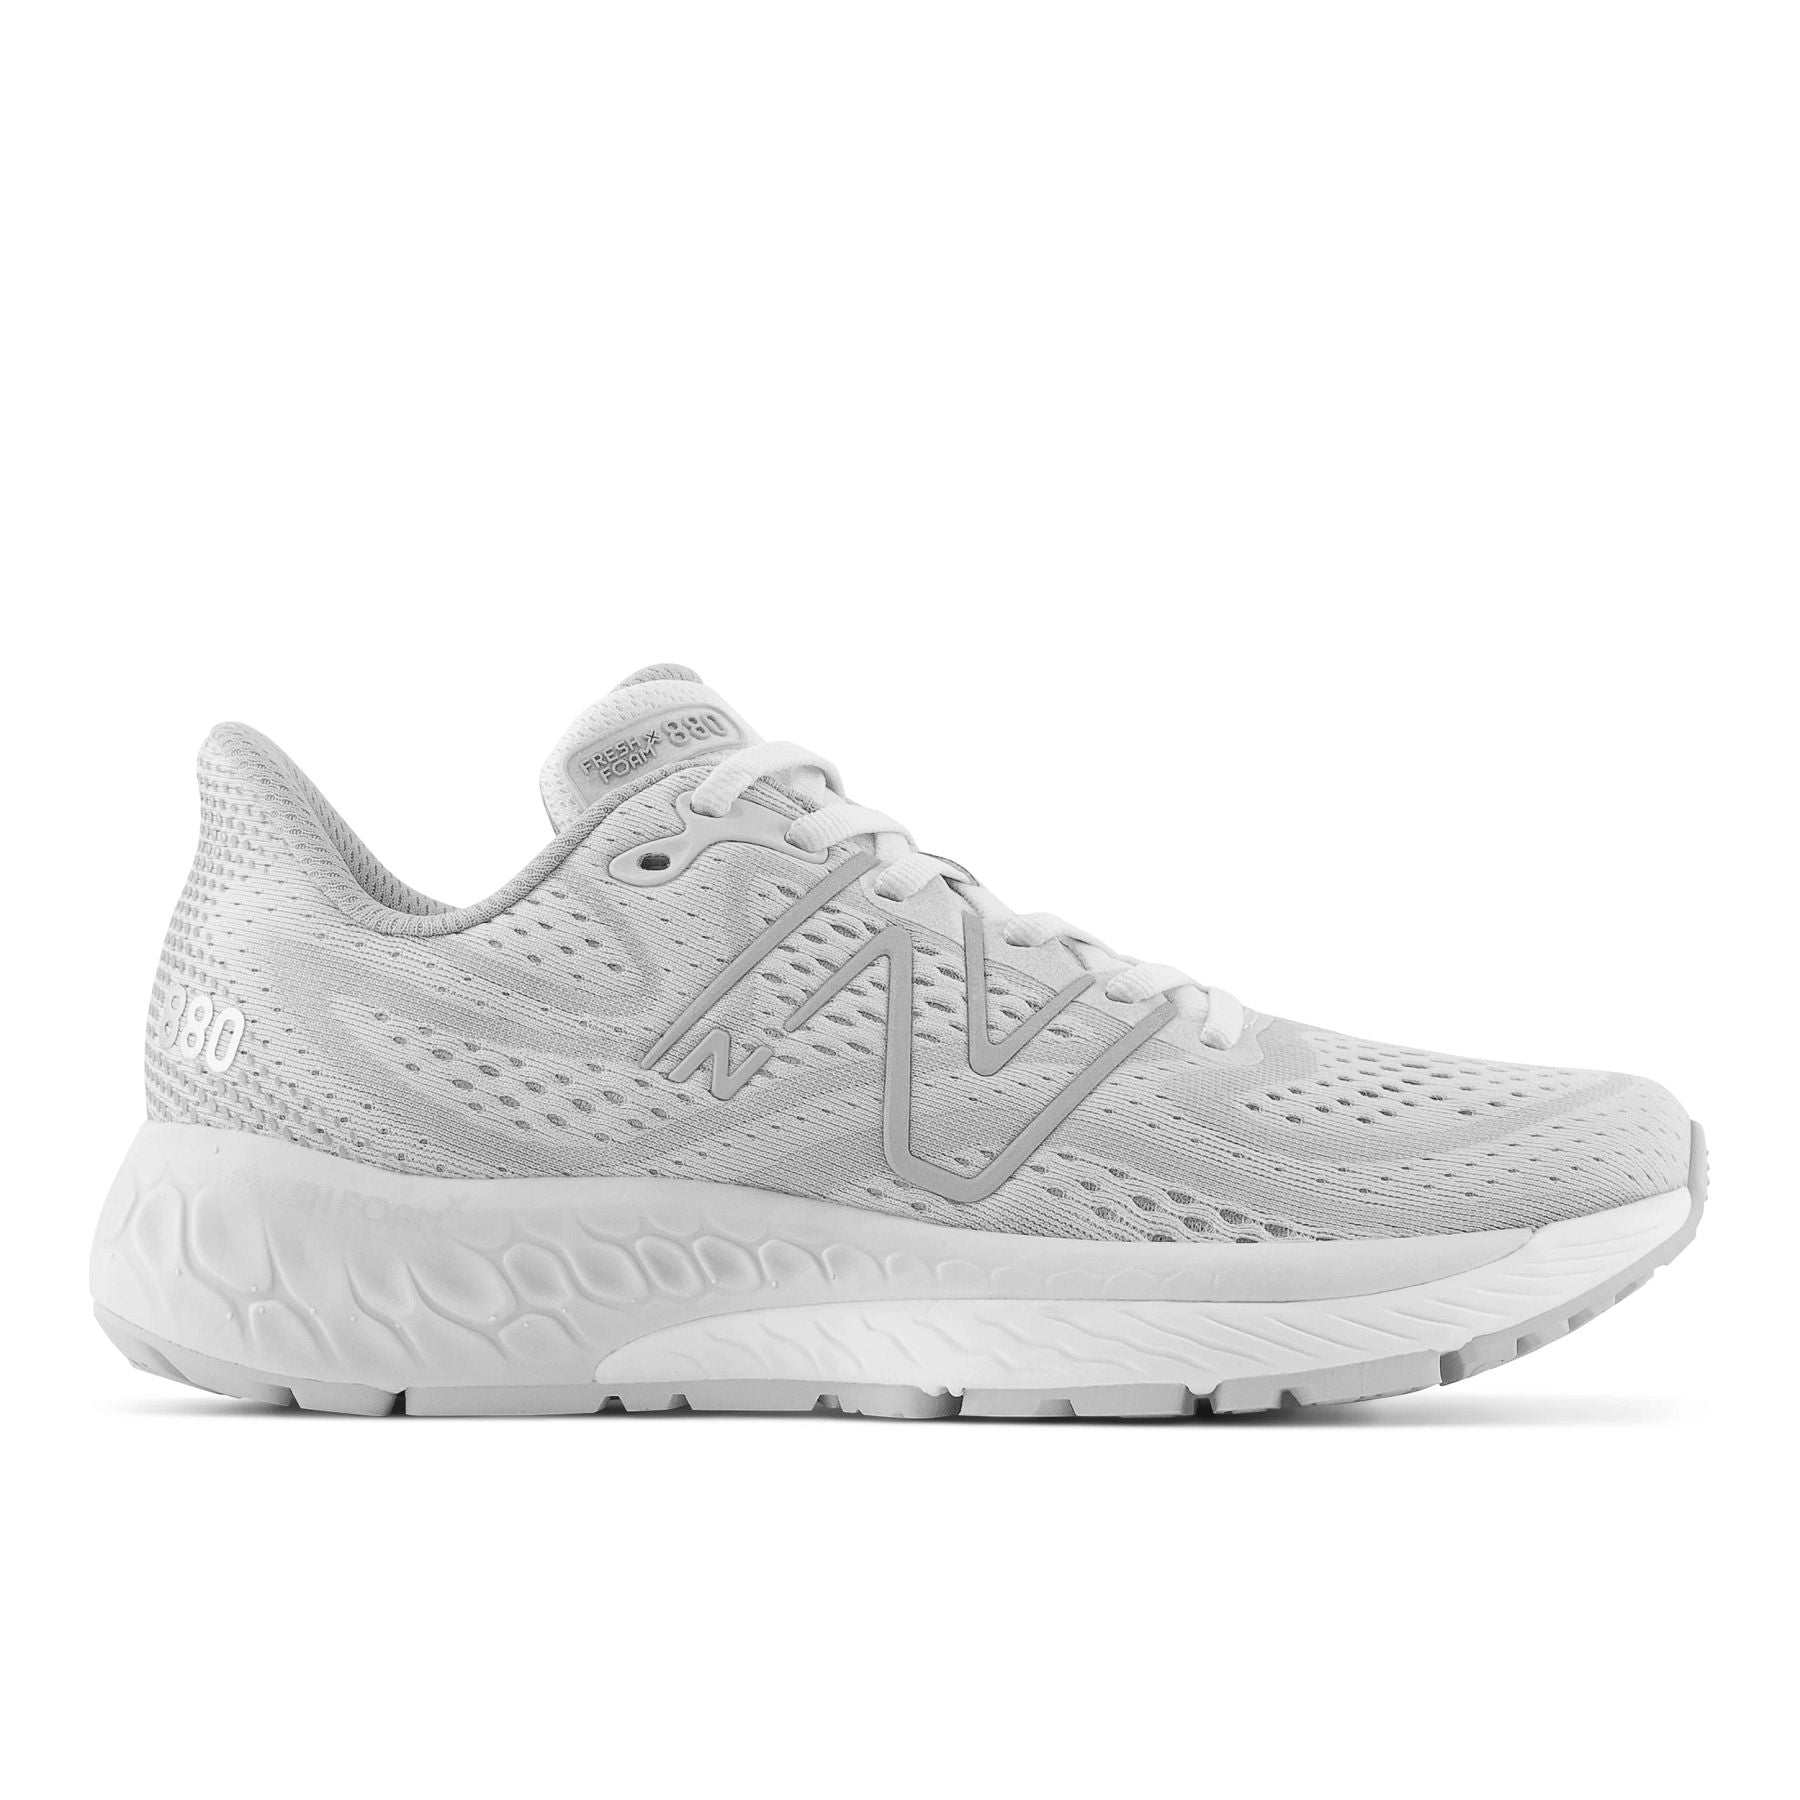 Lateral view of the Women's 880 V13 by New Balance in the color White/White